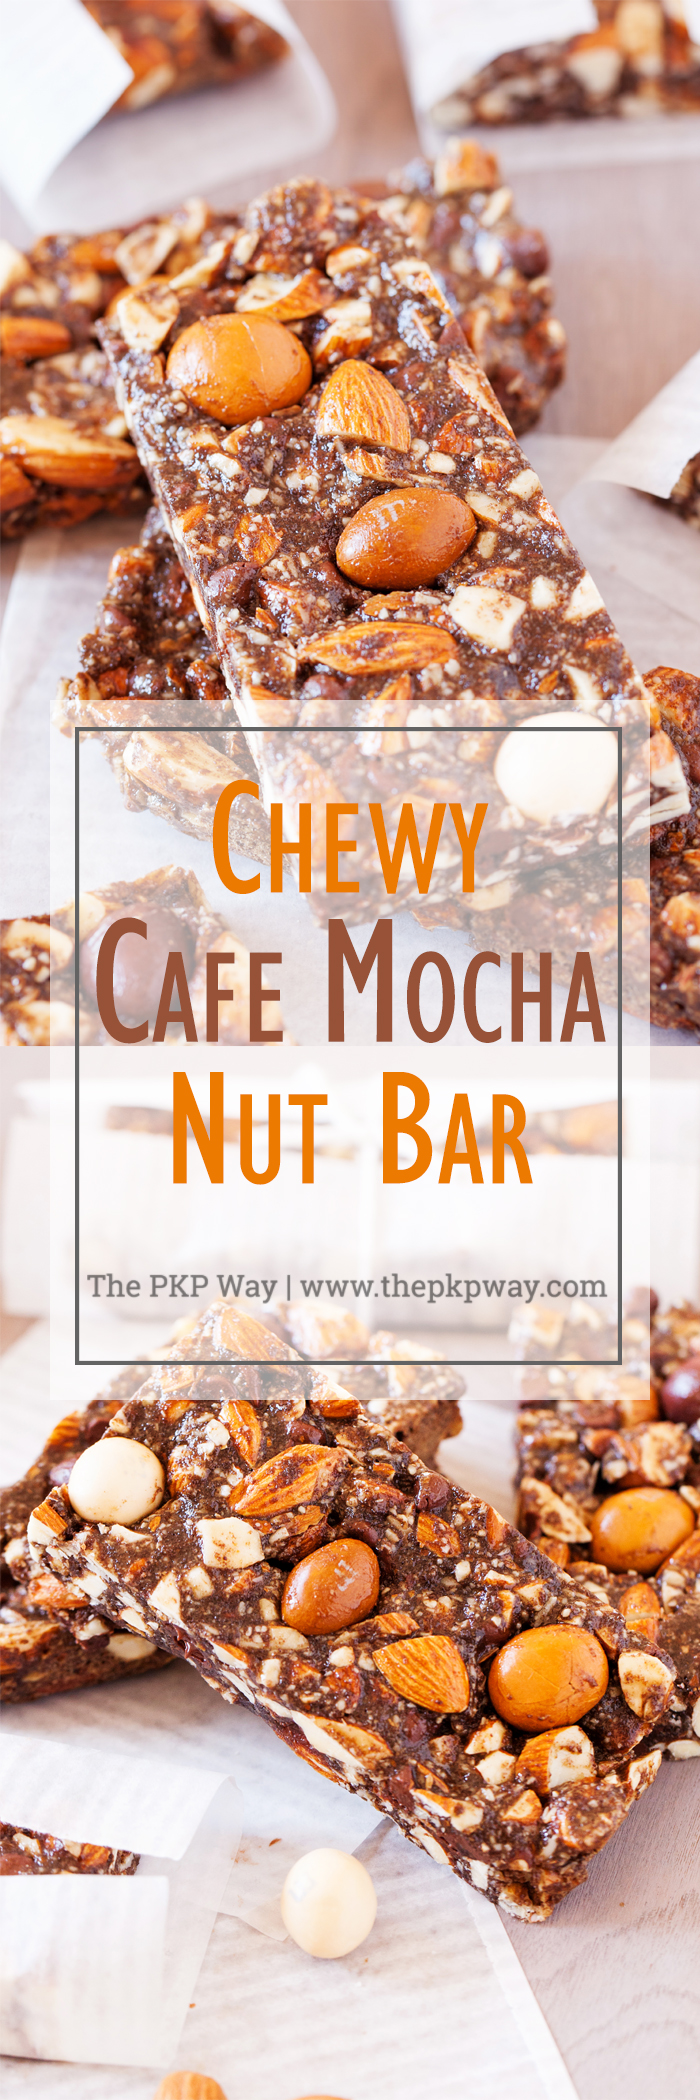 Calling all coffee lovers. These Chewy Café Mocha Nut Bars have an intense chocolate and espresso flavor, making for a fabulous and satiating snack.